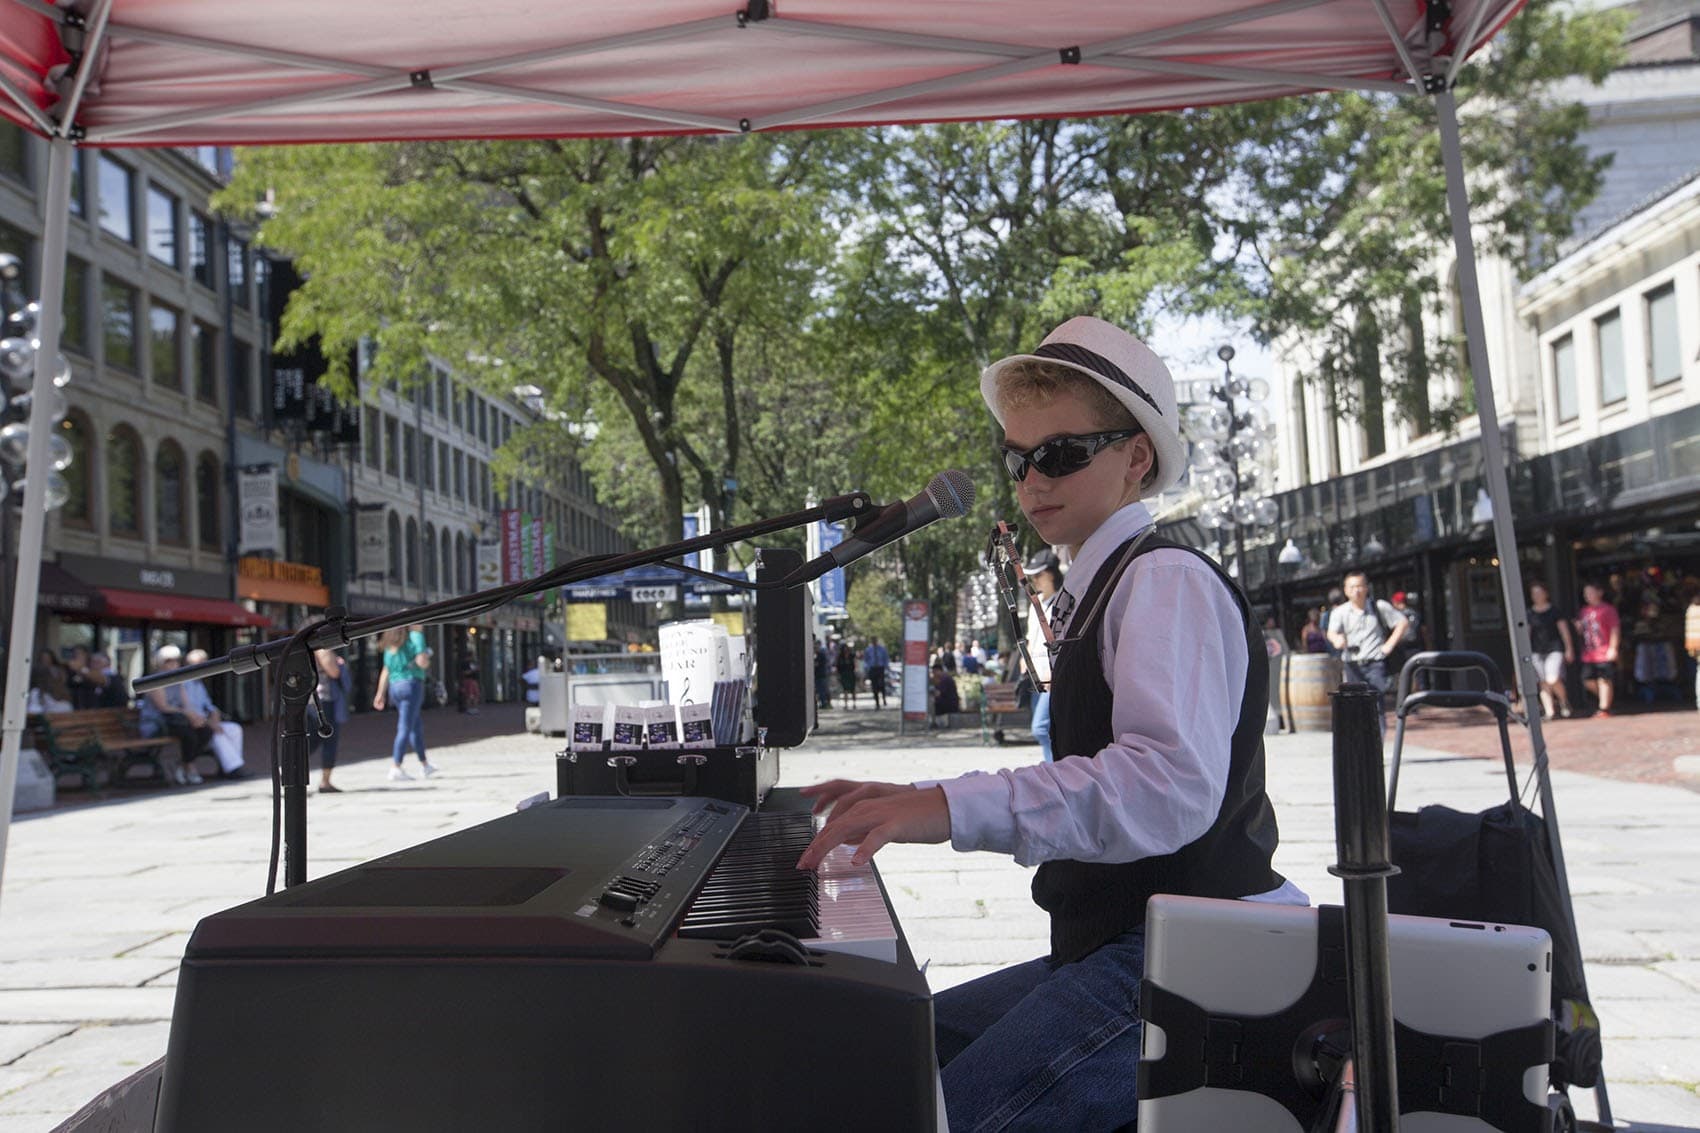 Bradley Bartlett-Roche, known as the Boston Piano Kid, plays in Faneuil Hall this summer. (Joe Difazio for WBUR)